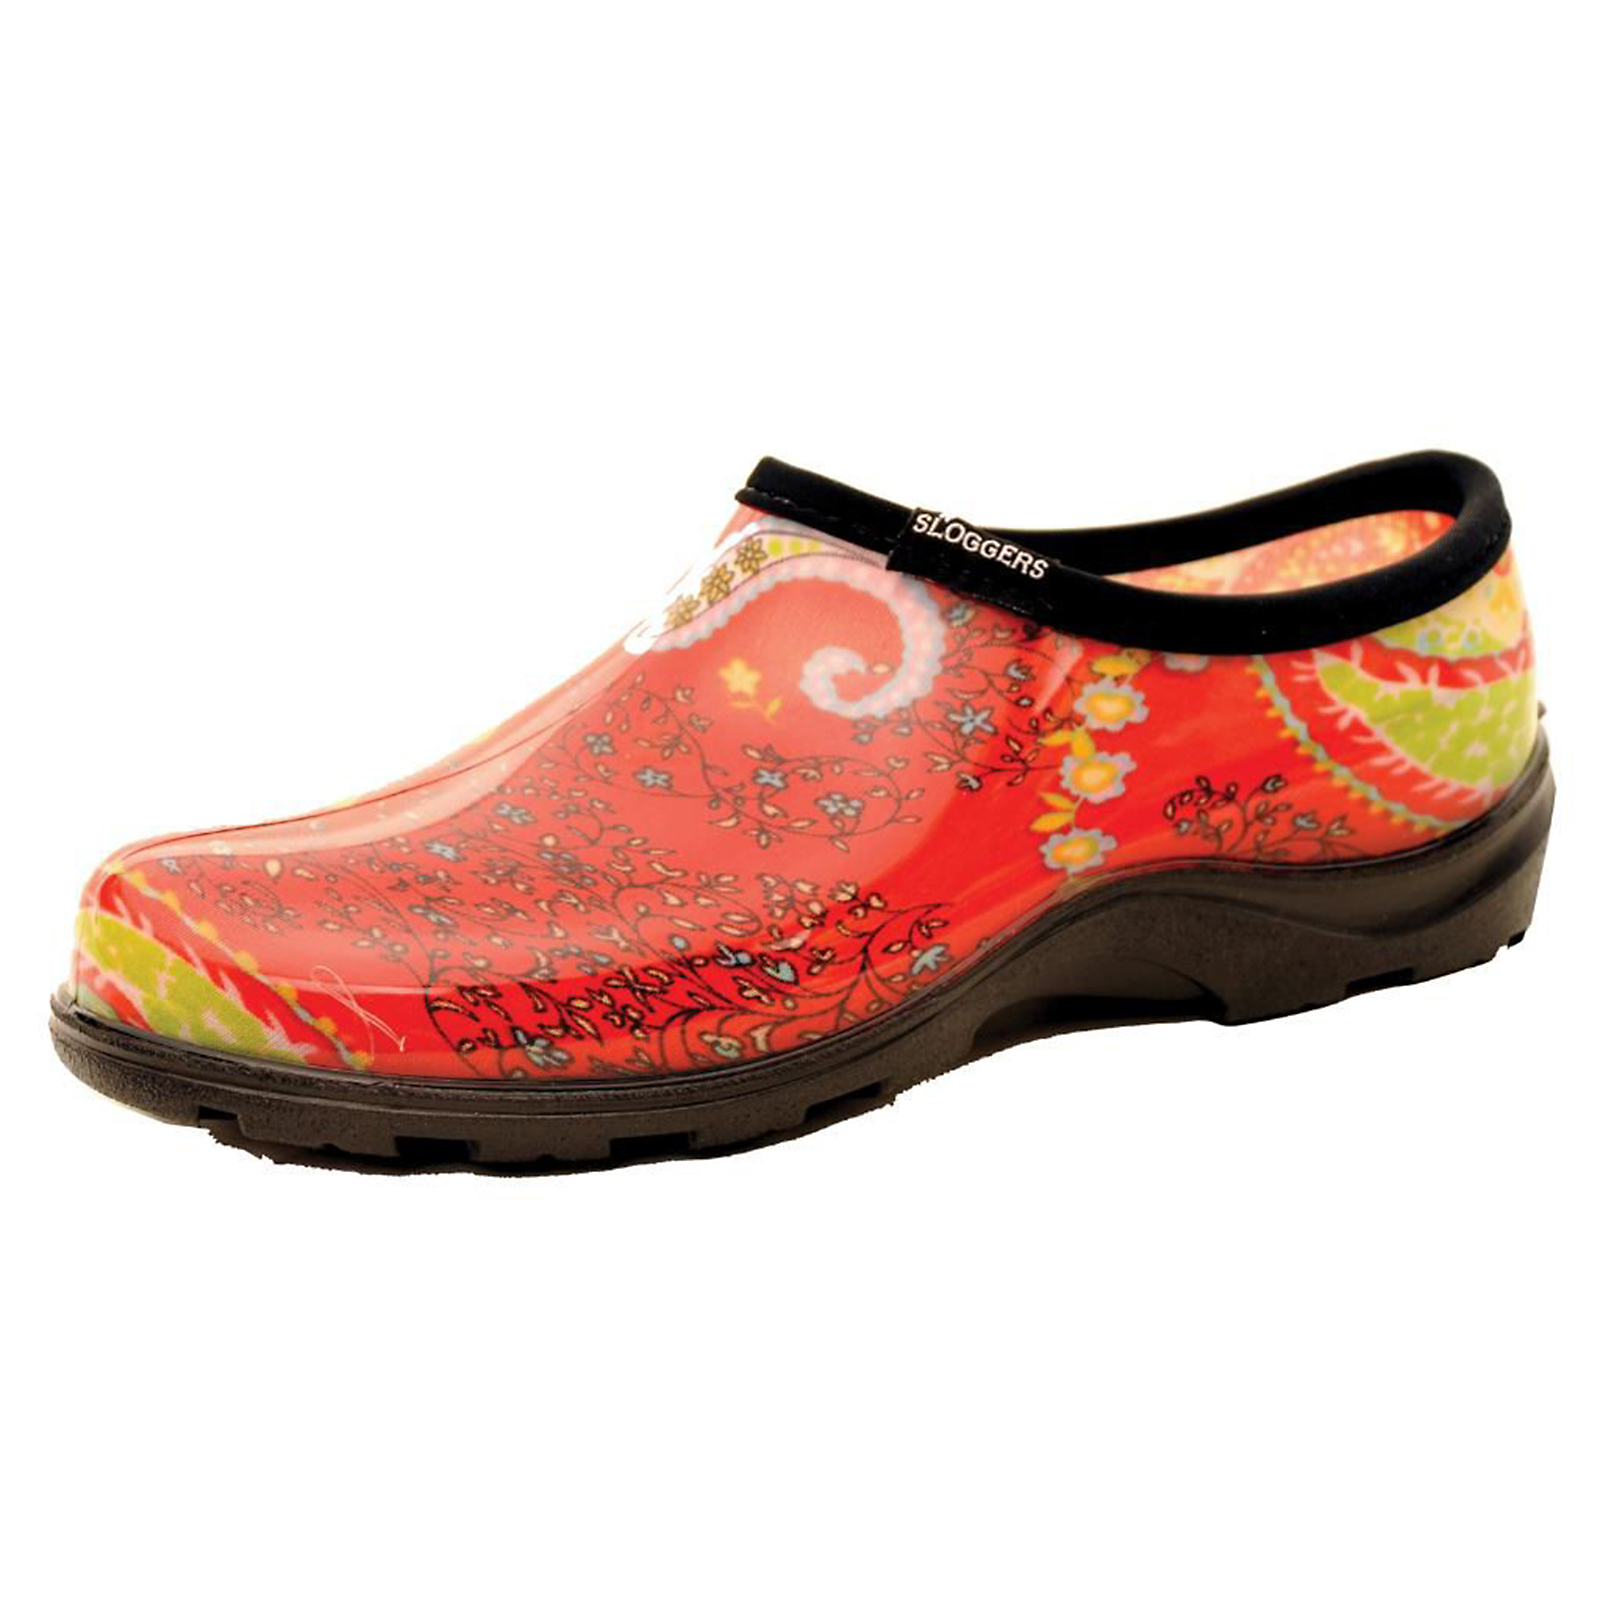 Sloggers PPL5104RD06 Womens Garden Shoe Paisley Red